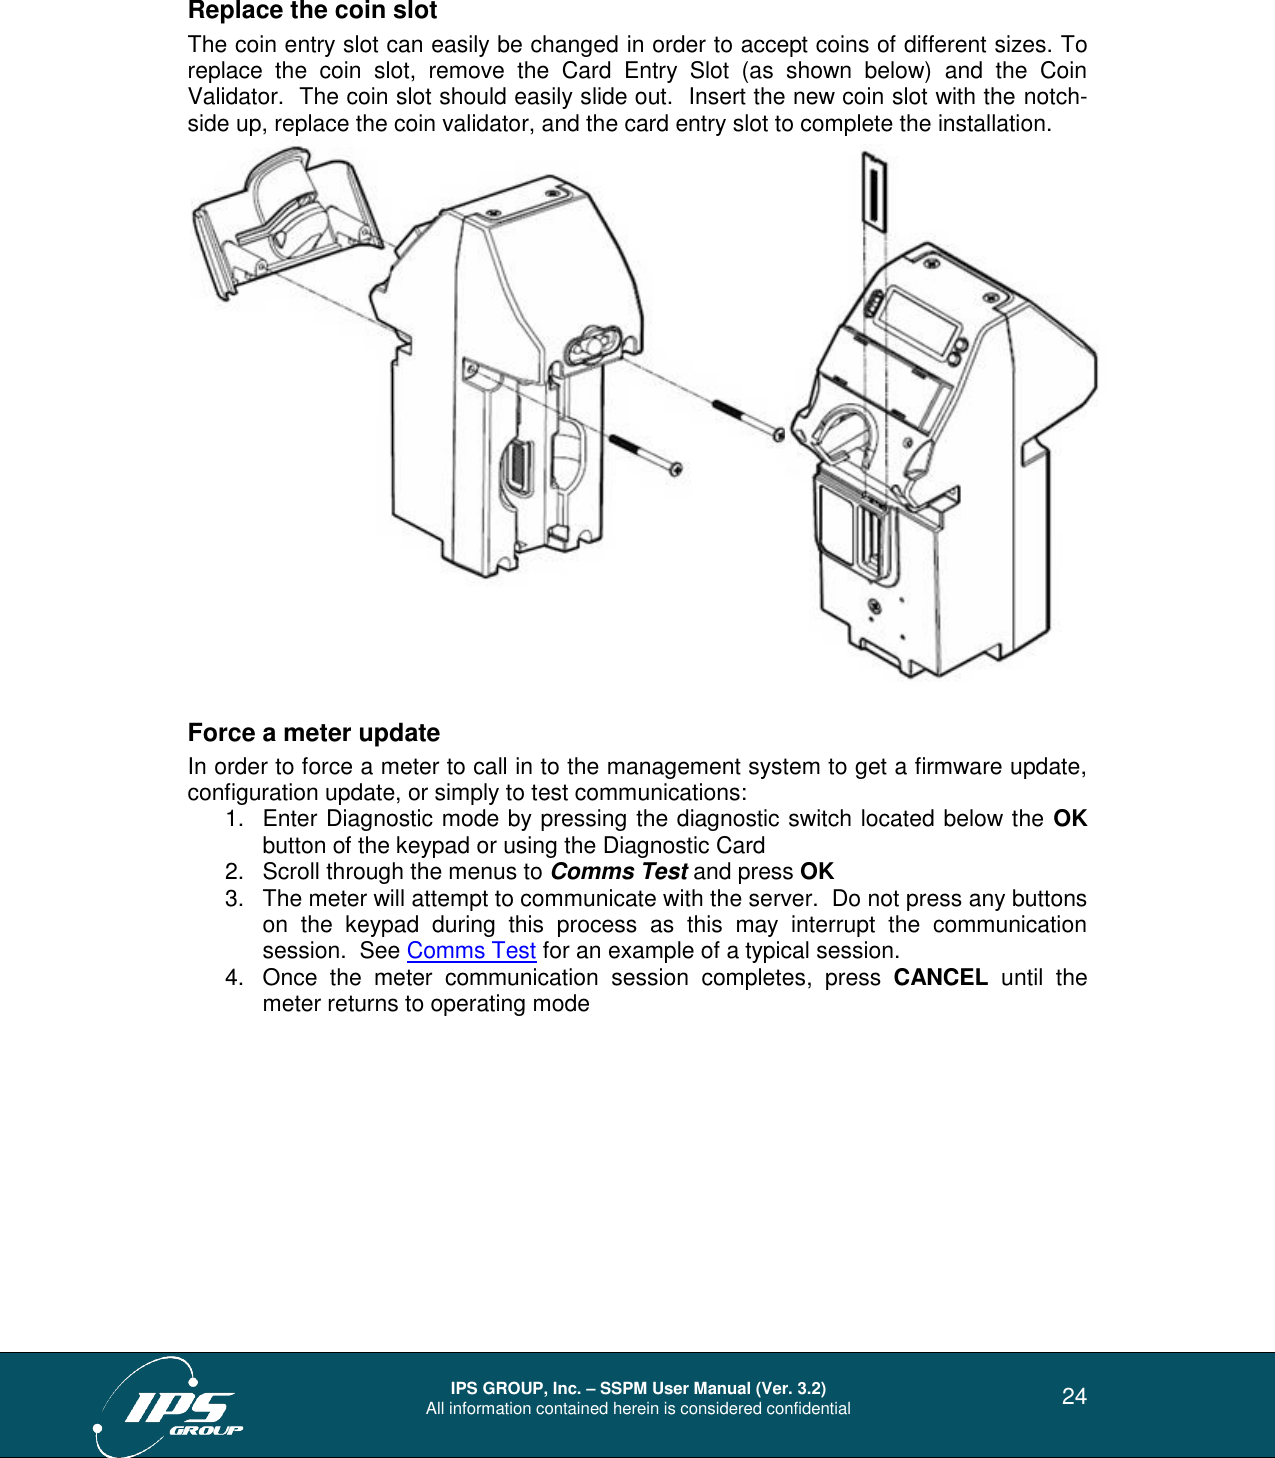  IPS GROUP, Inc. – SSPM User Manual (Ver. 3.2) All information contained herein is considered confidential   24 Replace the coin slot The coin entry slot can easily be changed in order to accept coins of different sizes. To replace  the  coin  slot,  remove  the  Card  Entry  Slot  (as  shown  below)  and  the  Coin Validator.  The coin slot should easily slide out.  Insert the new coin slot with the notch-side up, replace the coin validator, and the card entry slot to complete the installation.      Force a meter update In order to force a meter to call in to the management system to get a firmware update, configuration update, or simply to test communications: 1.  Enter Diagnostic mode by pressing the diagnostic switch located below the OK button of the keypad or using the Diagnostic Card 2.  Scroll through the menus to Comms Test and press OK 3.  The meter will attempt to communicate with the server.  Do not press any buttons on  the  keypad  during  this  process  as  this  may  interrupt  the  communication session.  See Comms Test for an example of a typical session.  4.  Once  the  meter  communication  session  completes,  press  CANCEL  until  the meter returns to operating mode 